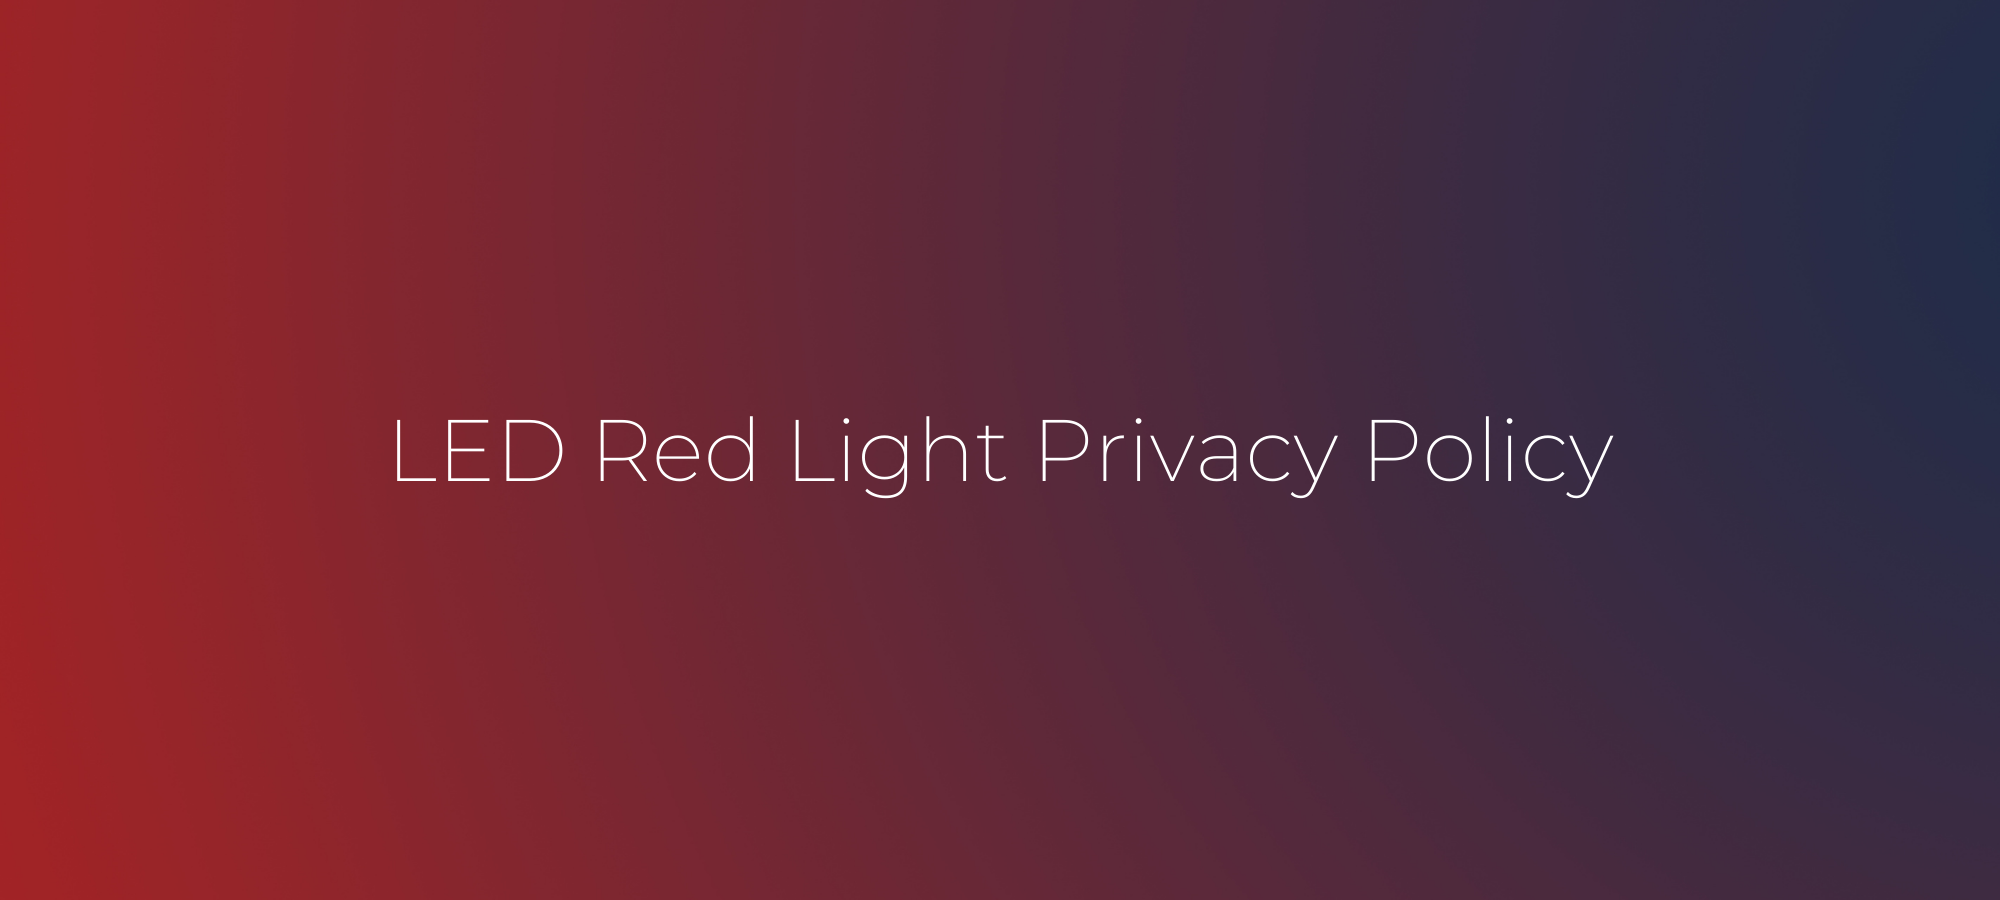 LED Red Light Privacy Policy